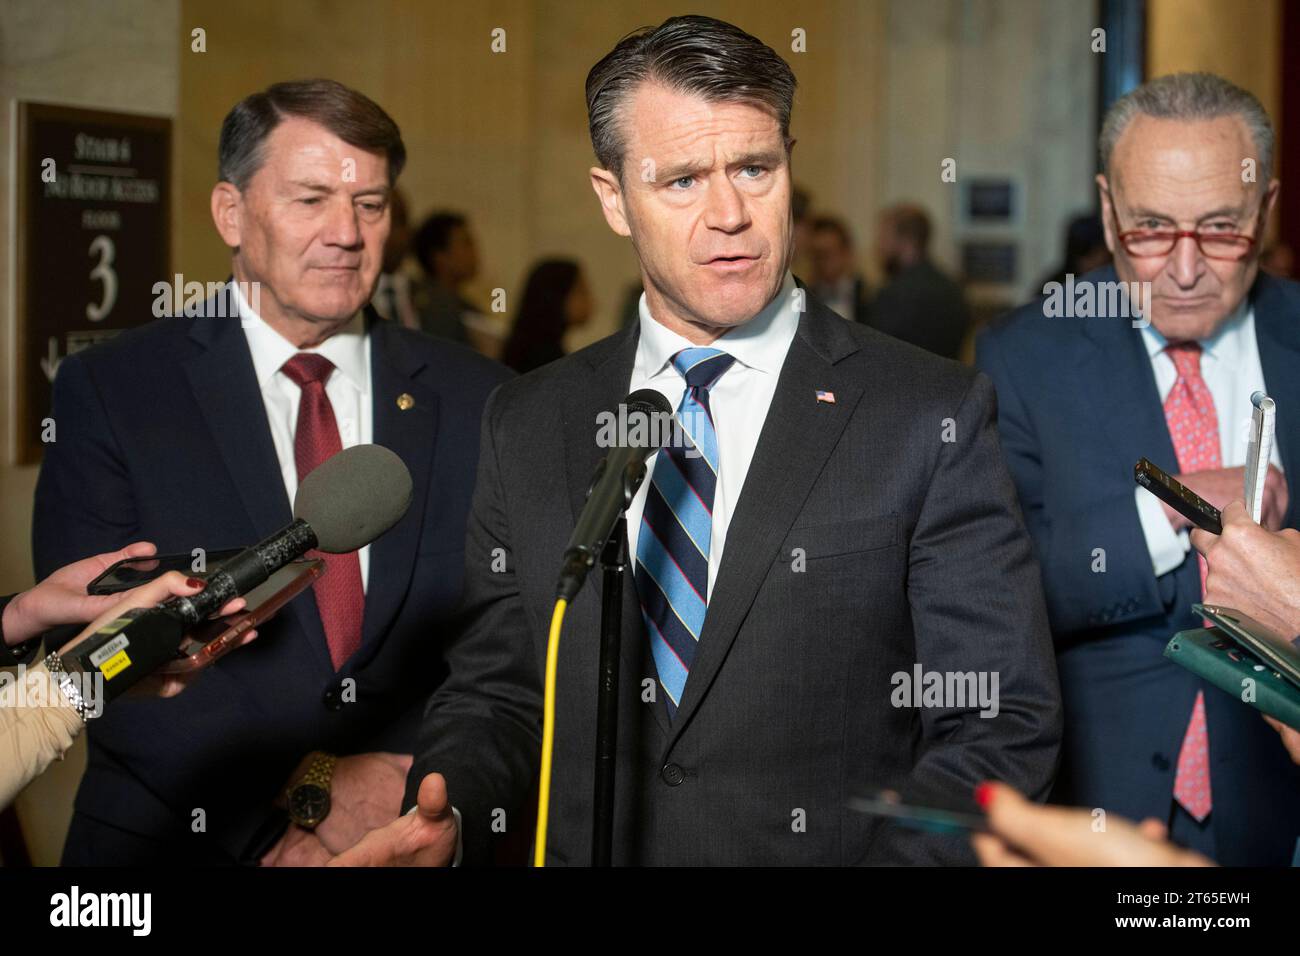 United States Senator Todd Young Republican of Indiana, center, is joined by United States Senator Mike Rounds Republican of South Dakota, left, and United States Senate Majority Leader Chuck Schumer Democrat of New York, right, for a press briefing in between panels of the Senate bipartisan AI Insight Forums in the Russell Senate Office Building in Washington, DC, Wednesday, November 8, 2023. The AI Insight Forums seek to bring together AI stakeholders to supercharge the Congressional process to develop bipartisan artificial intelligence legislation. The Forums have focused on capitalizing on Stock Photo